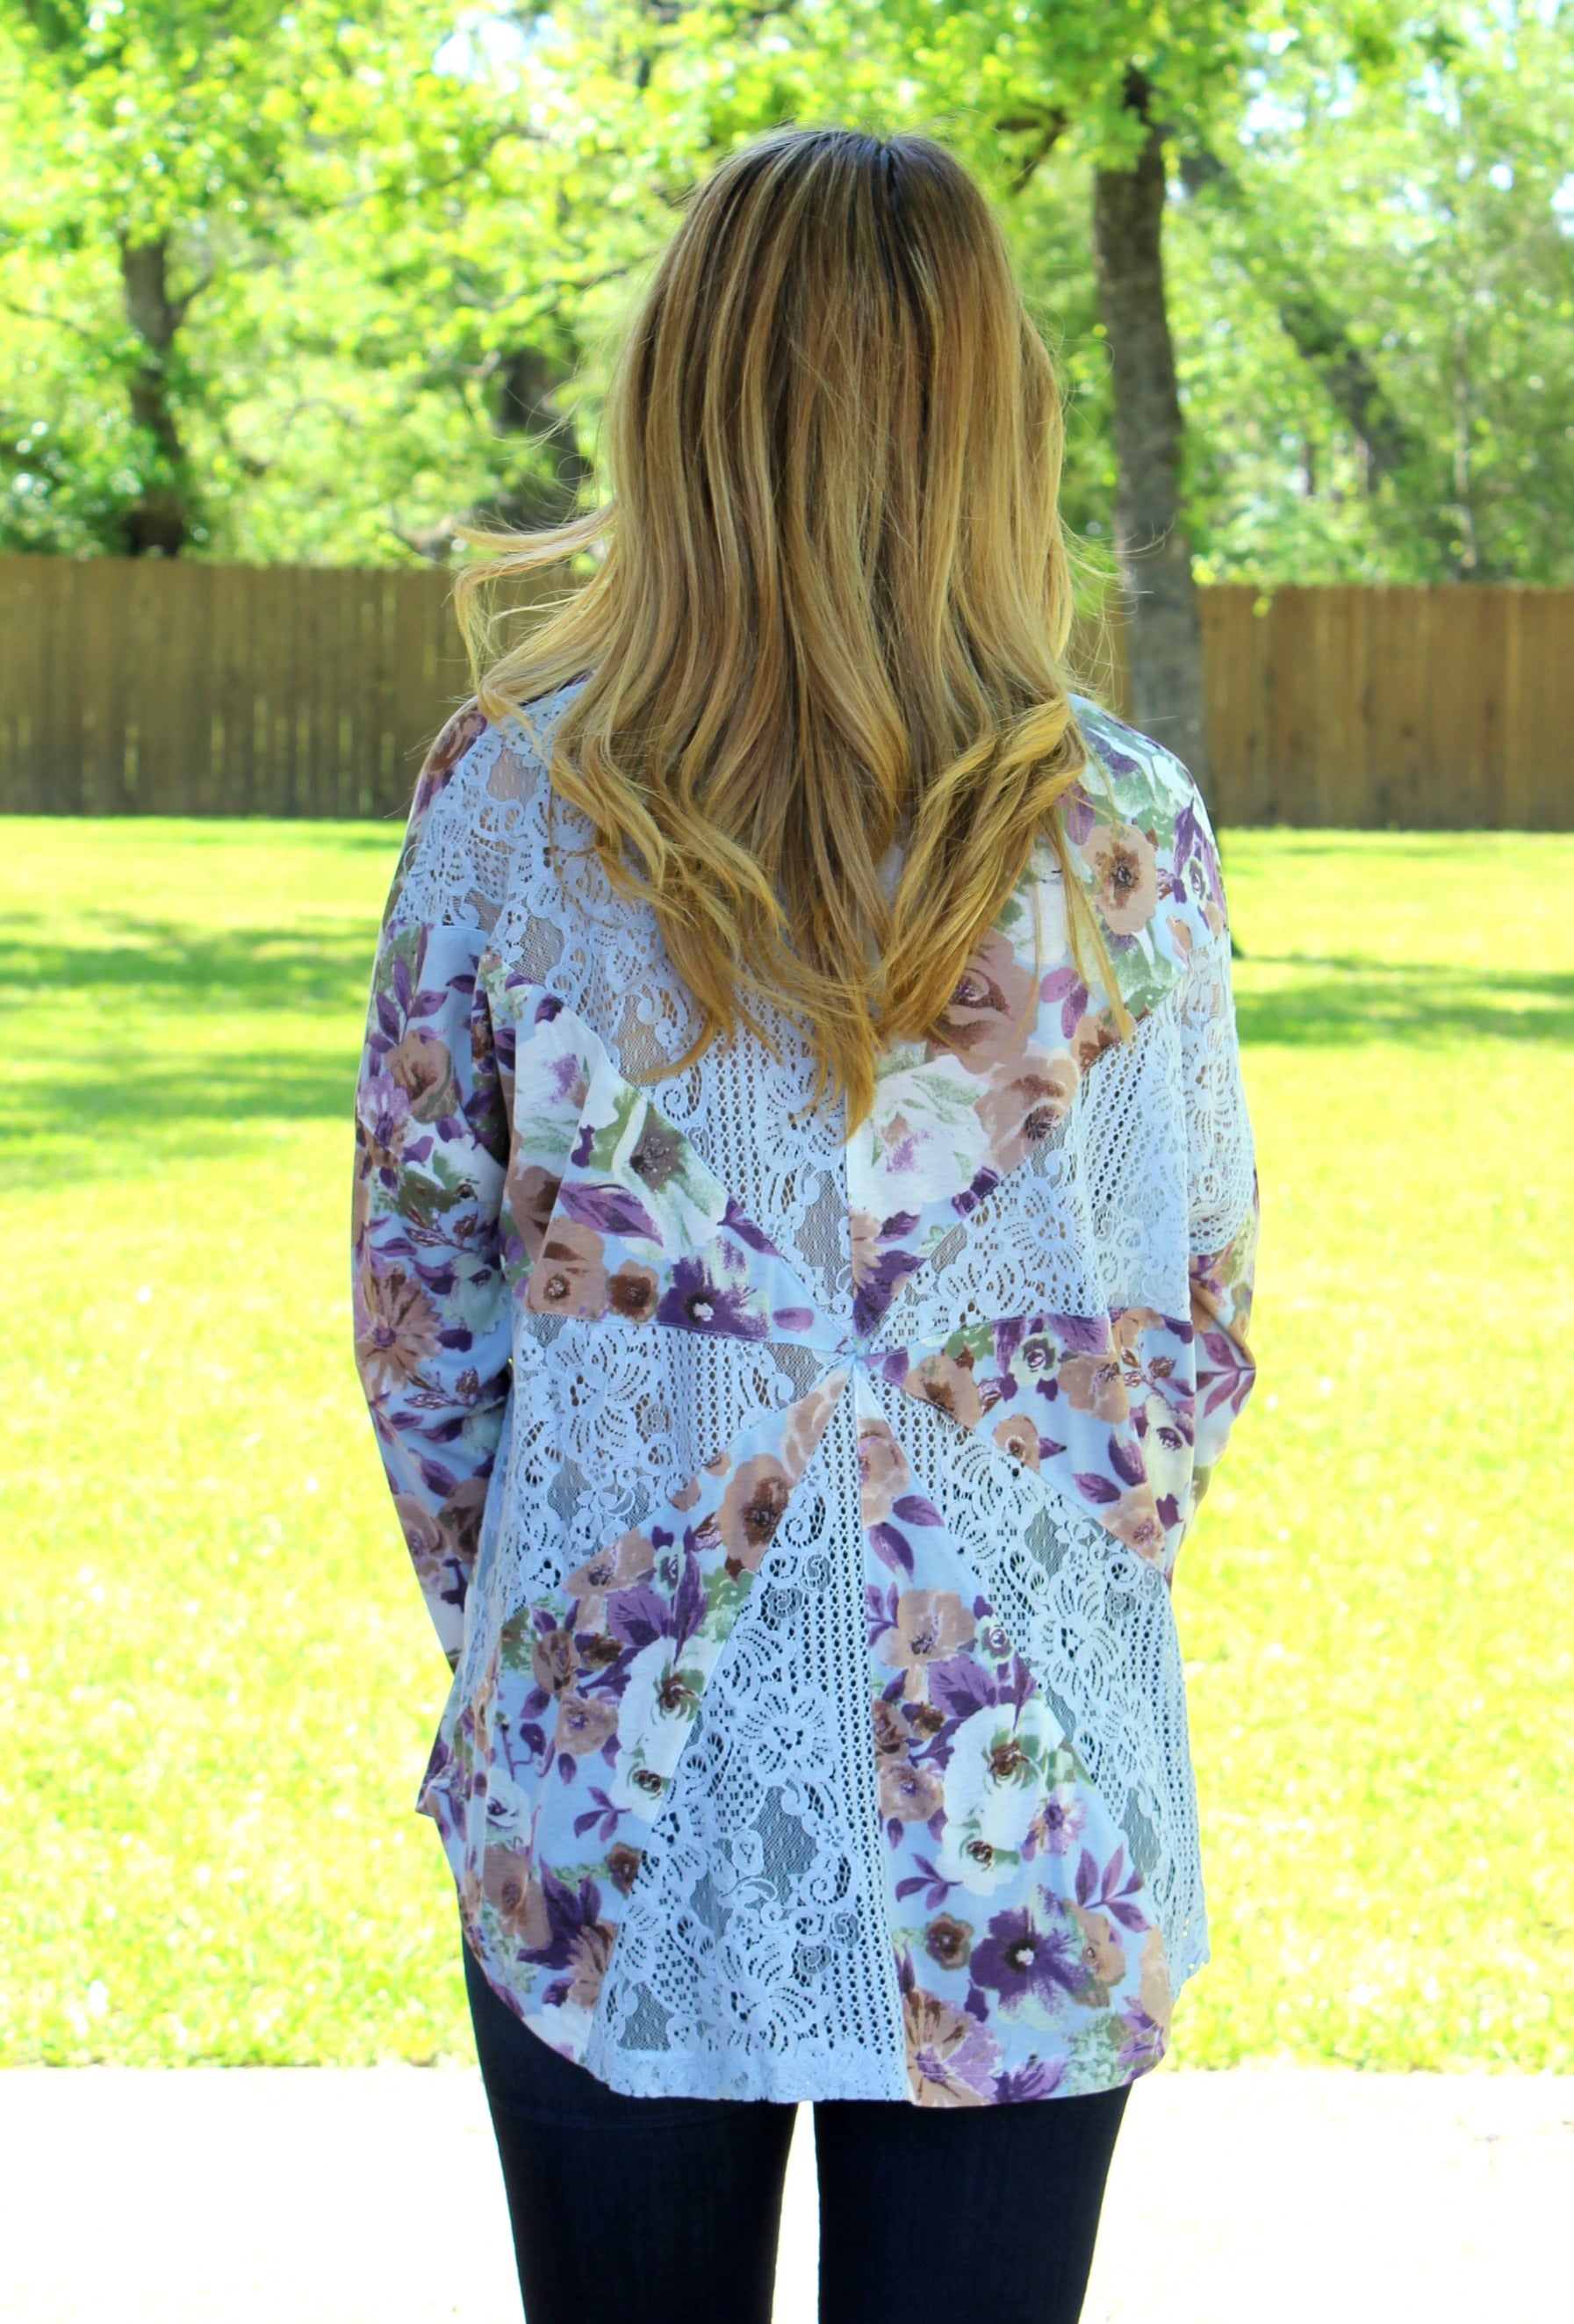 Last Chance Size Small | One Sweet Day Floral Piko Top with Lace Panel Back in Powder Blue and Lavender - Giddy Up Glamour Boutique